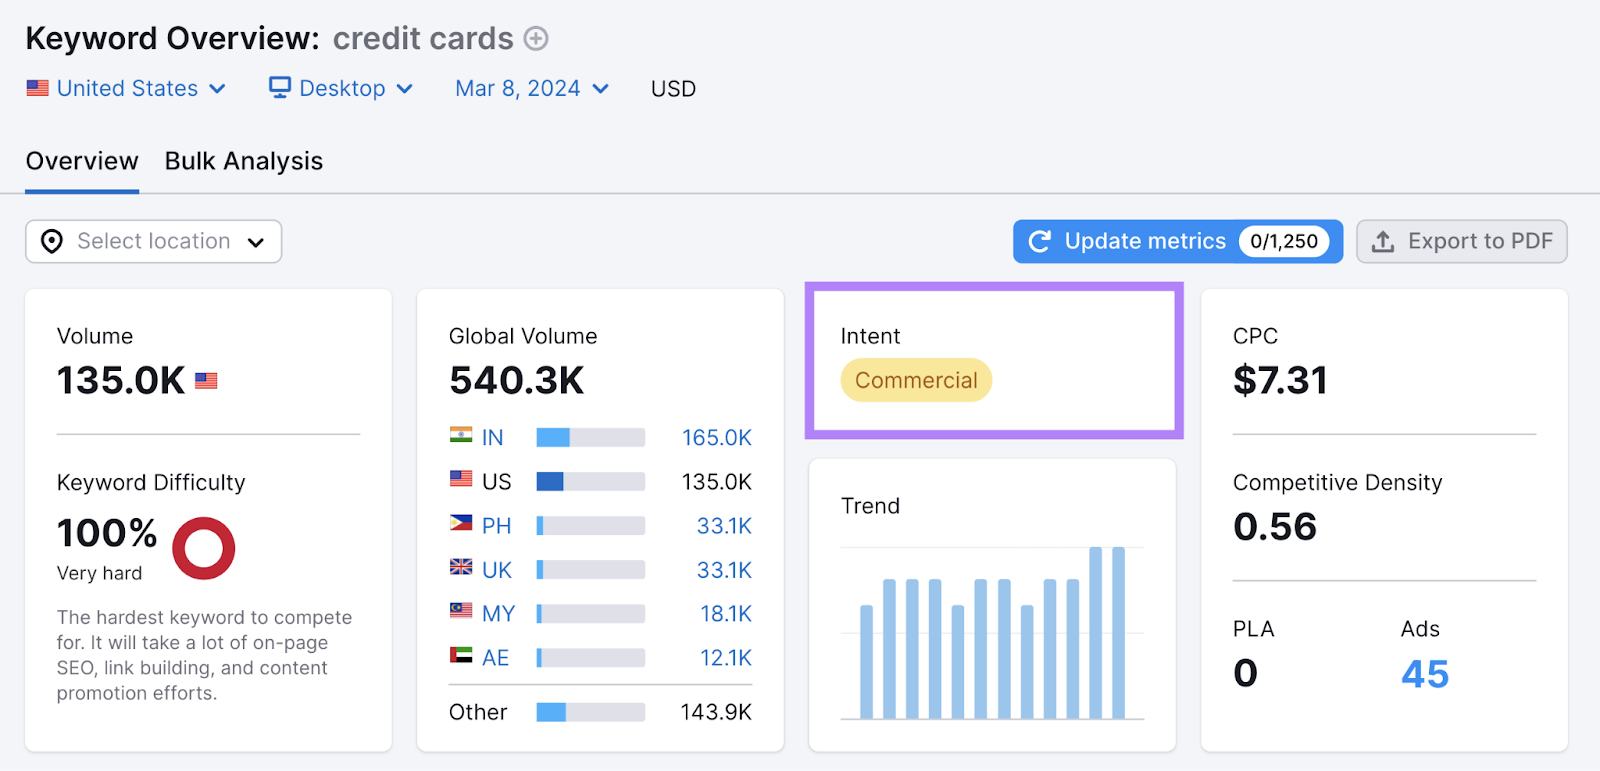 Intent metric for "credit cards" shown successful  Keyword Overview